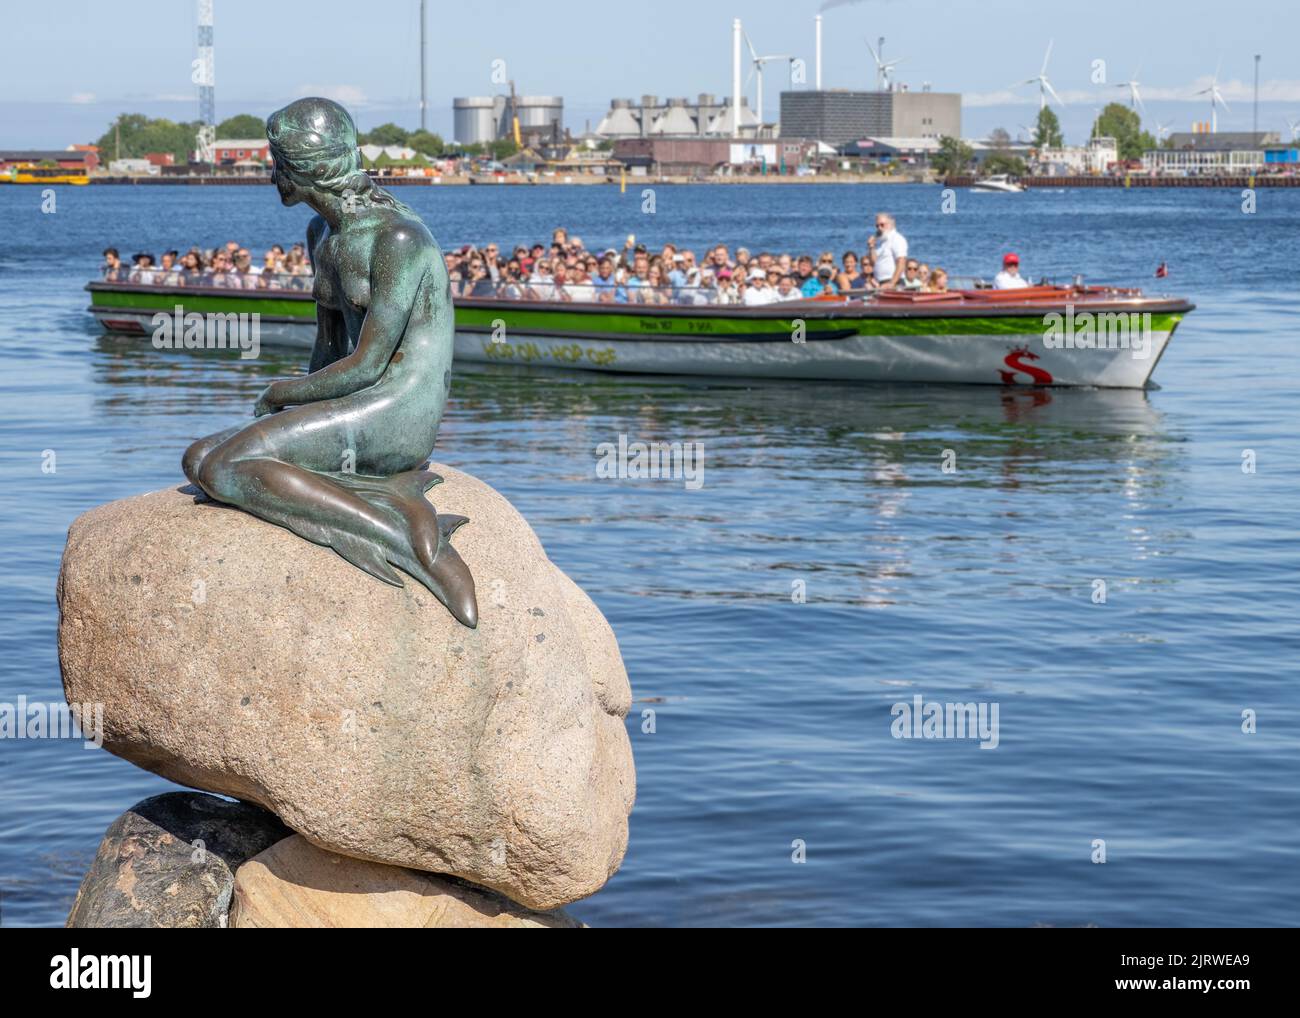 Tourists in Copenhagen Denmark visiting the bronze sculpture of the Little Mermaid by Edvard Eriksen on the Langelinie promenade by the city's harbour Stock Photo